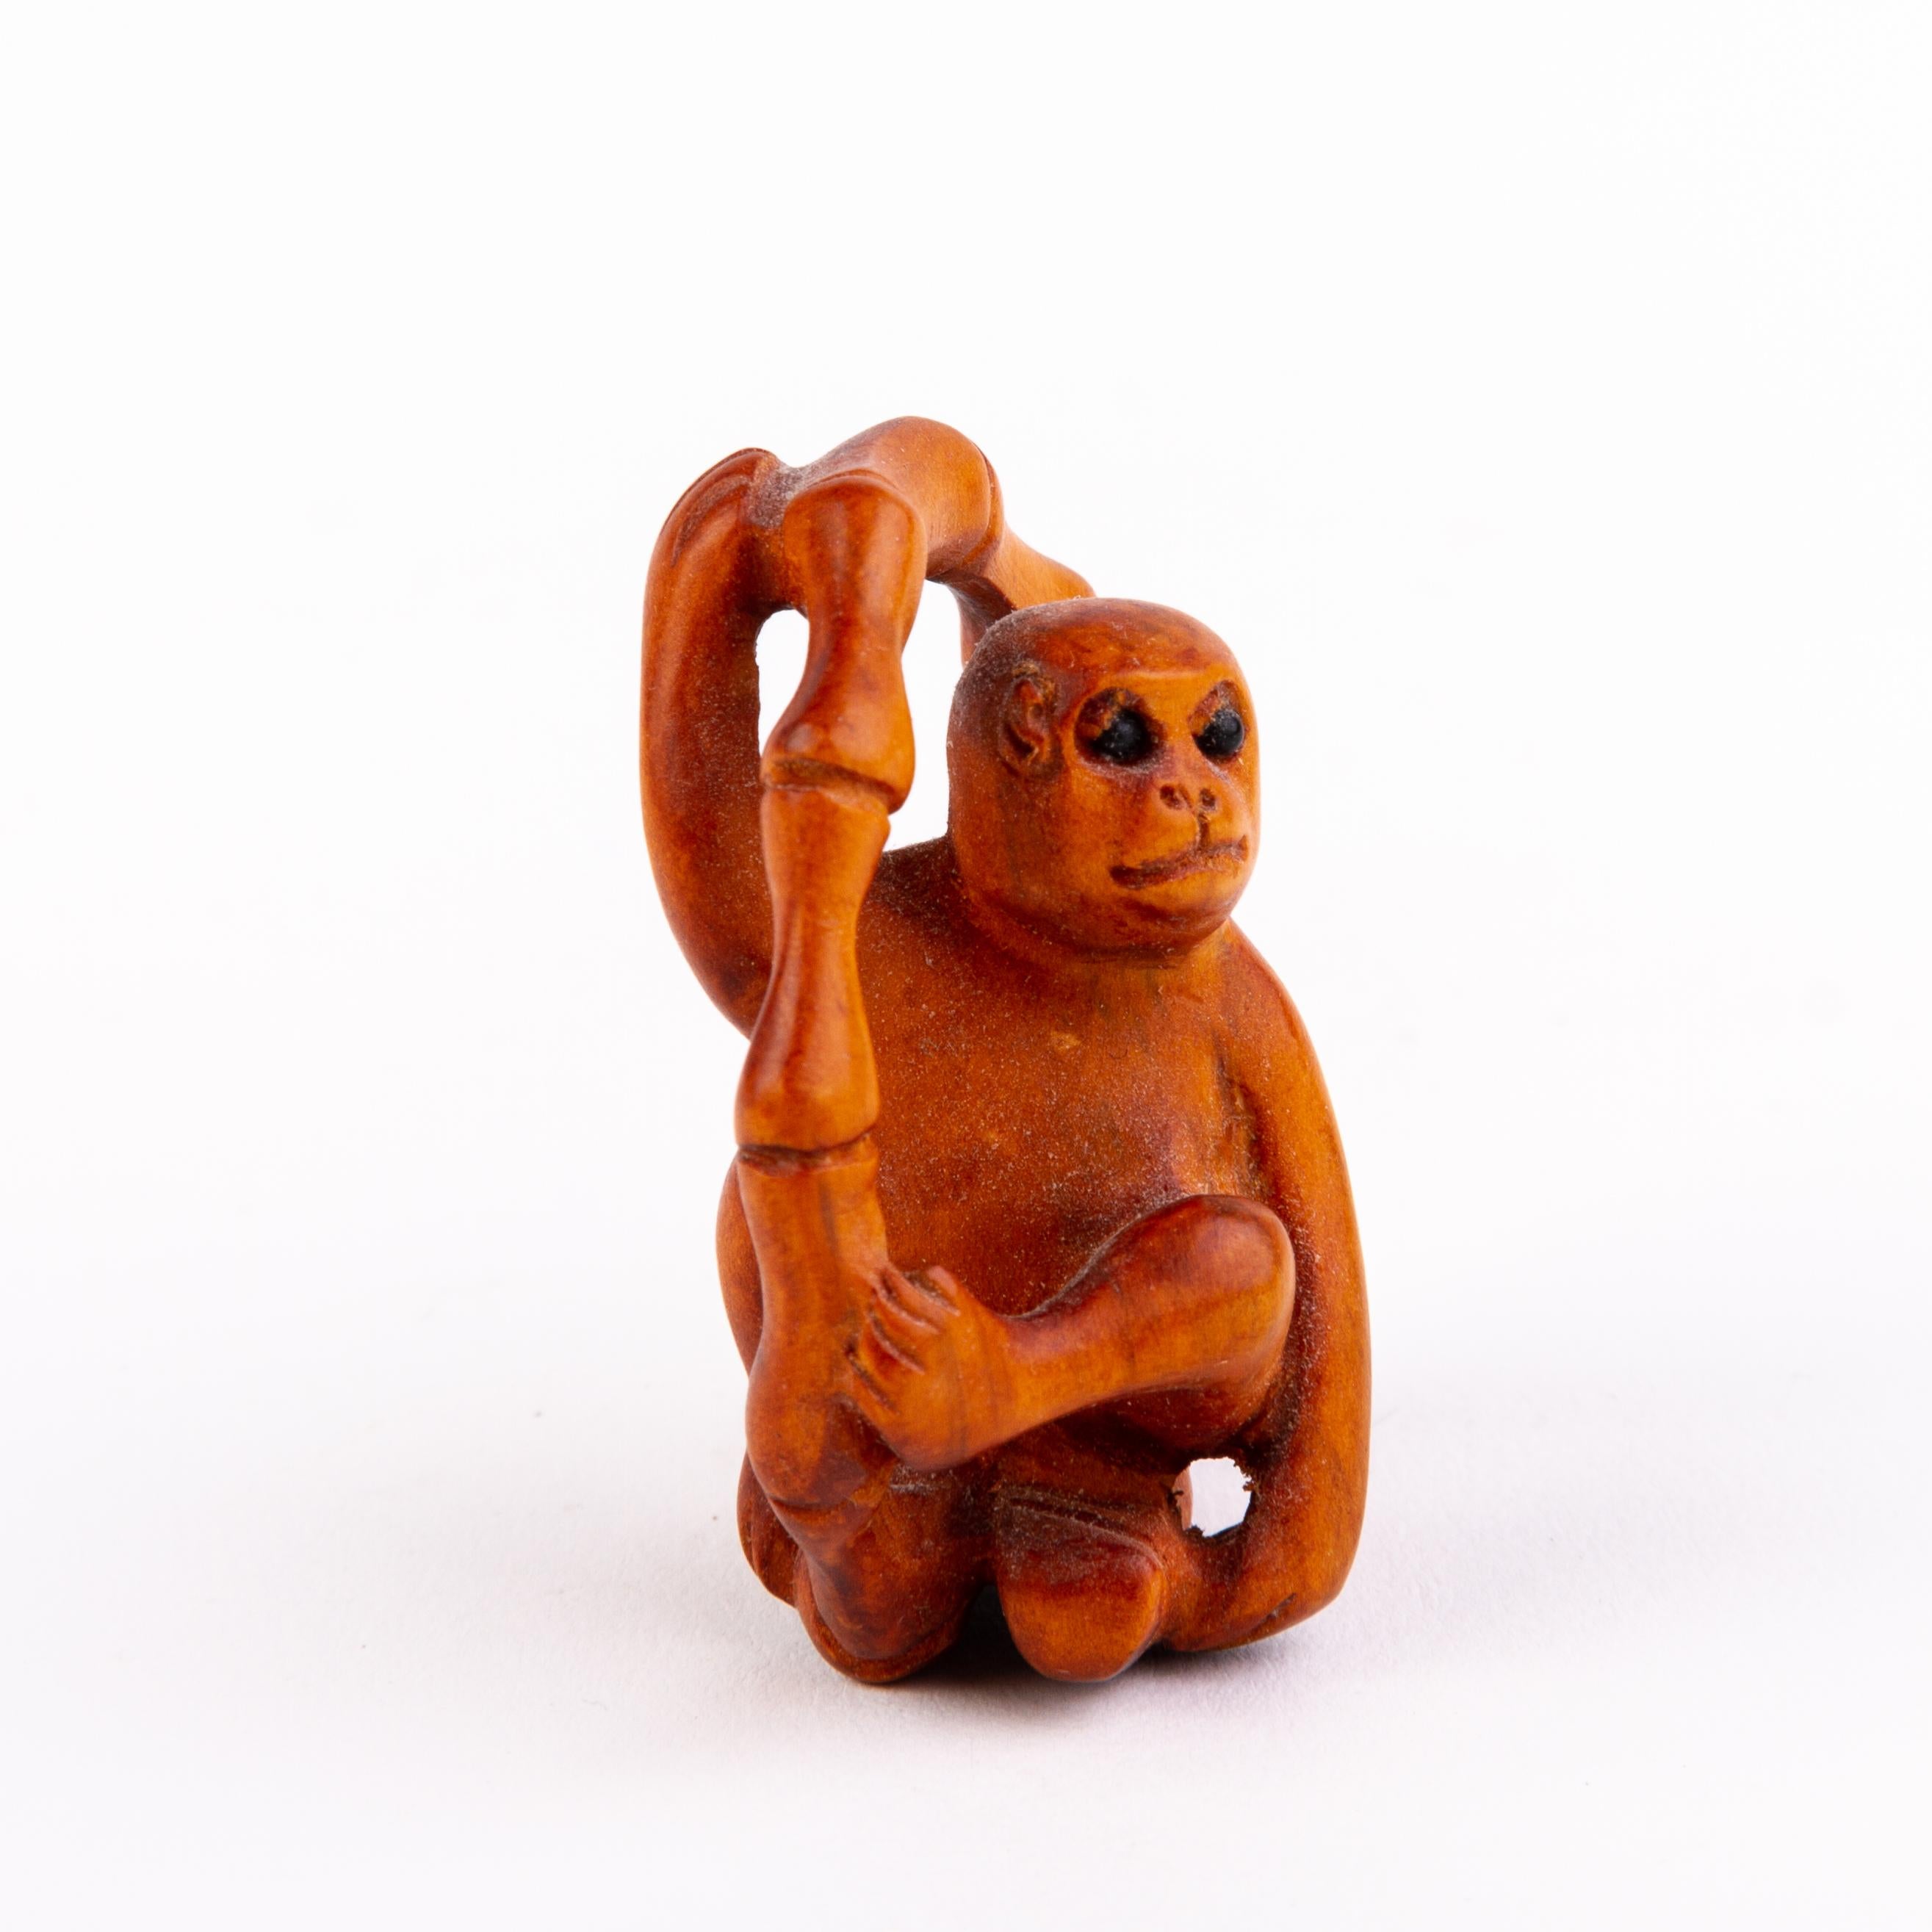 In good condition
From a private collection
Free international shipping
Signed Japanese Boxwood Netsuke Inro of a Monkey 